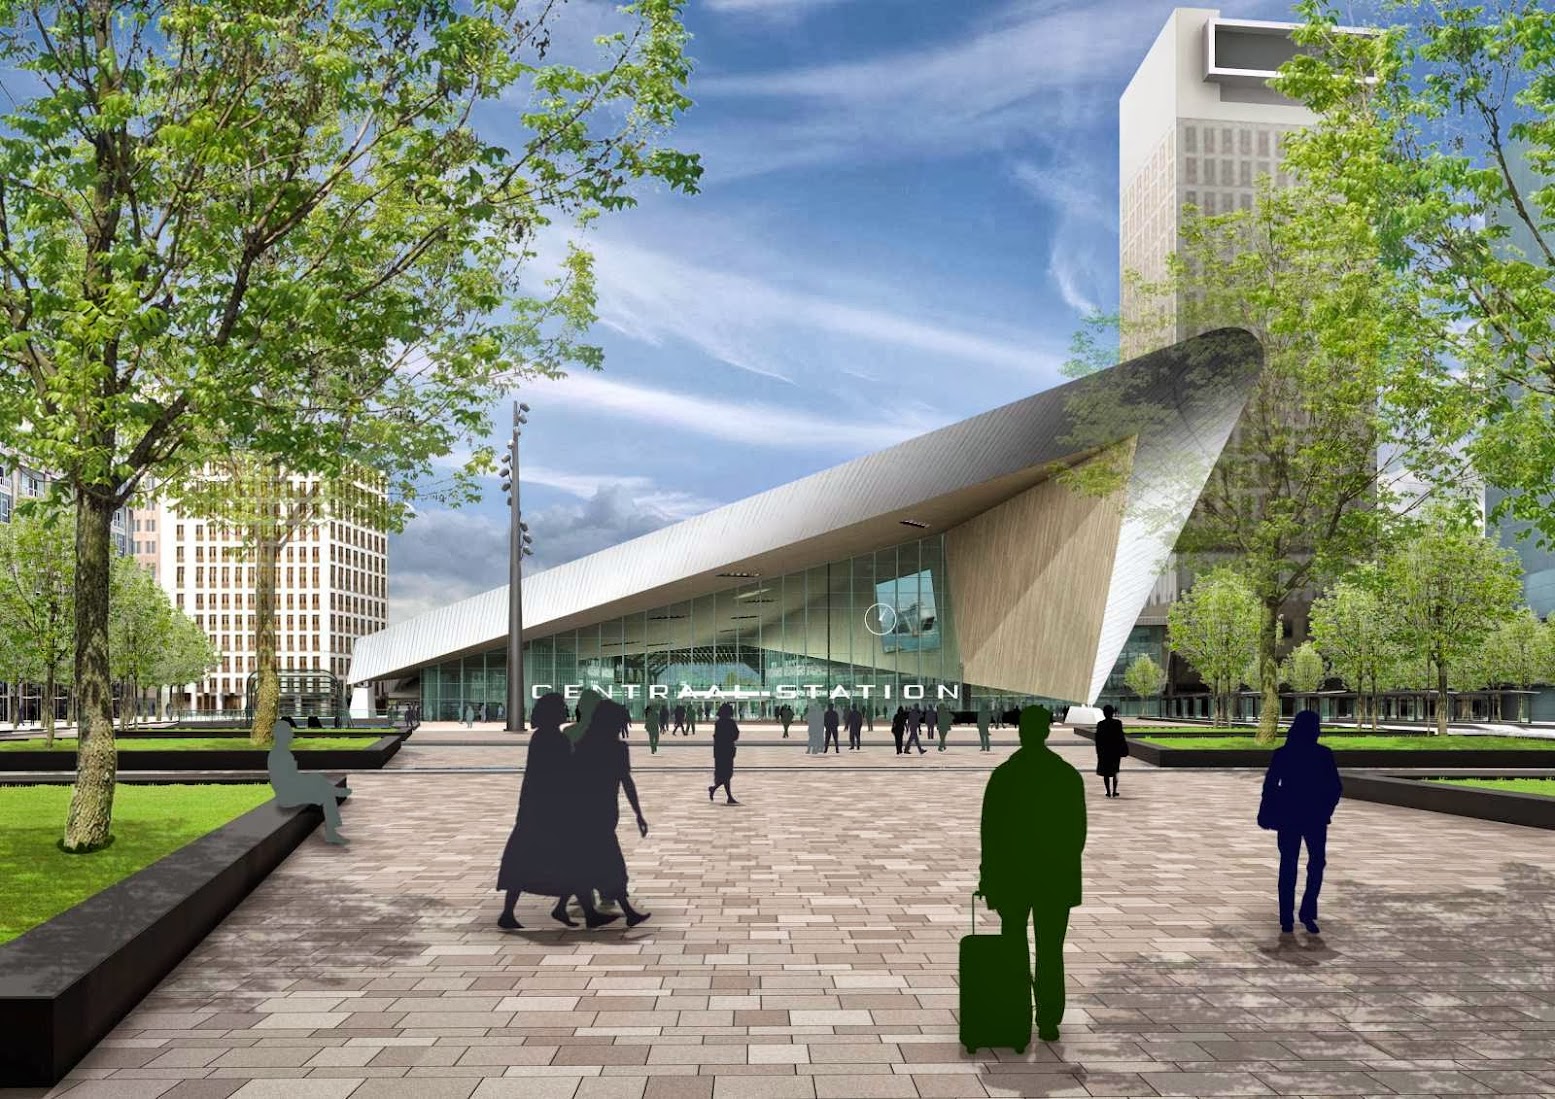 Rotterdam, Paesi Bassi: [ROTTERDAM CENTRAL STATION OPENS IN 2014]